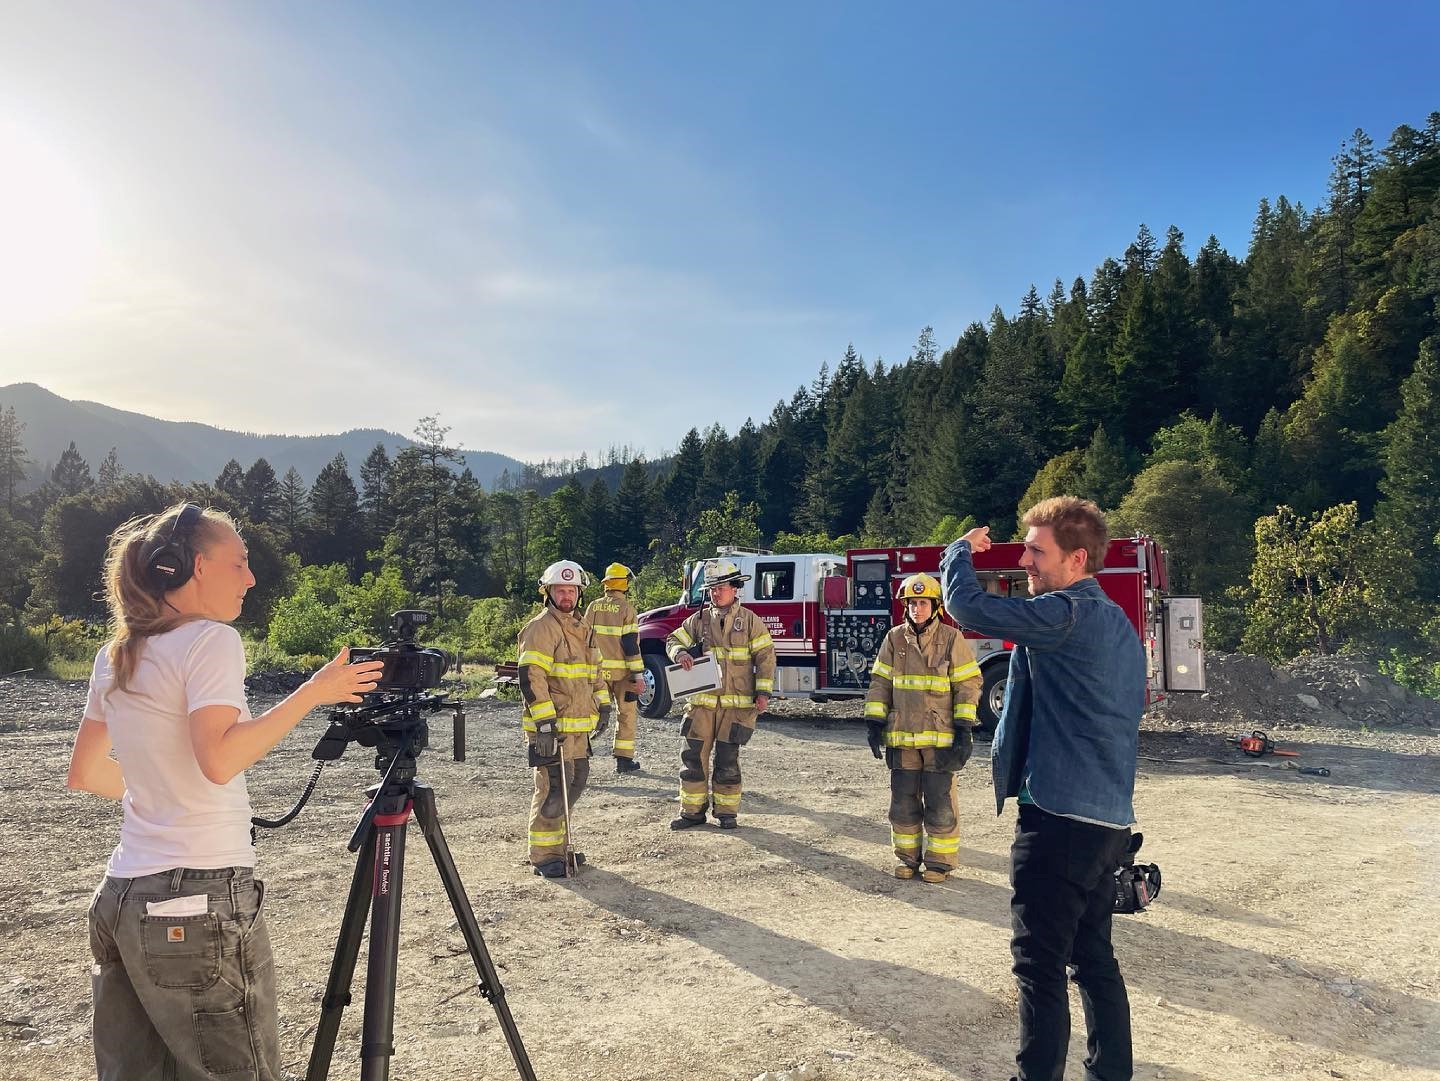 Bruno Seraphin (right) and Stormy Staats (left) making an educational video with the Orleans Volunteer Fire Department. Summer 2021. Karuk territory. Photo by Vikki Preston.